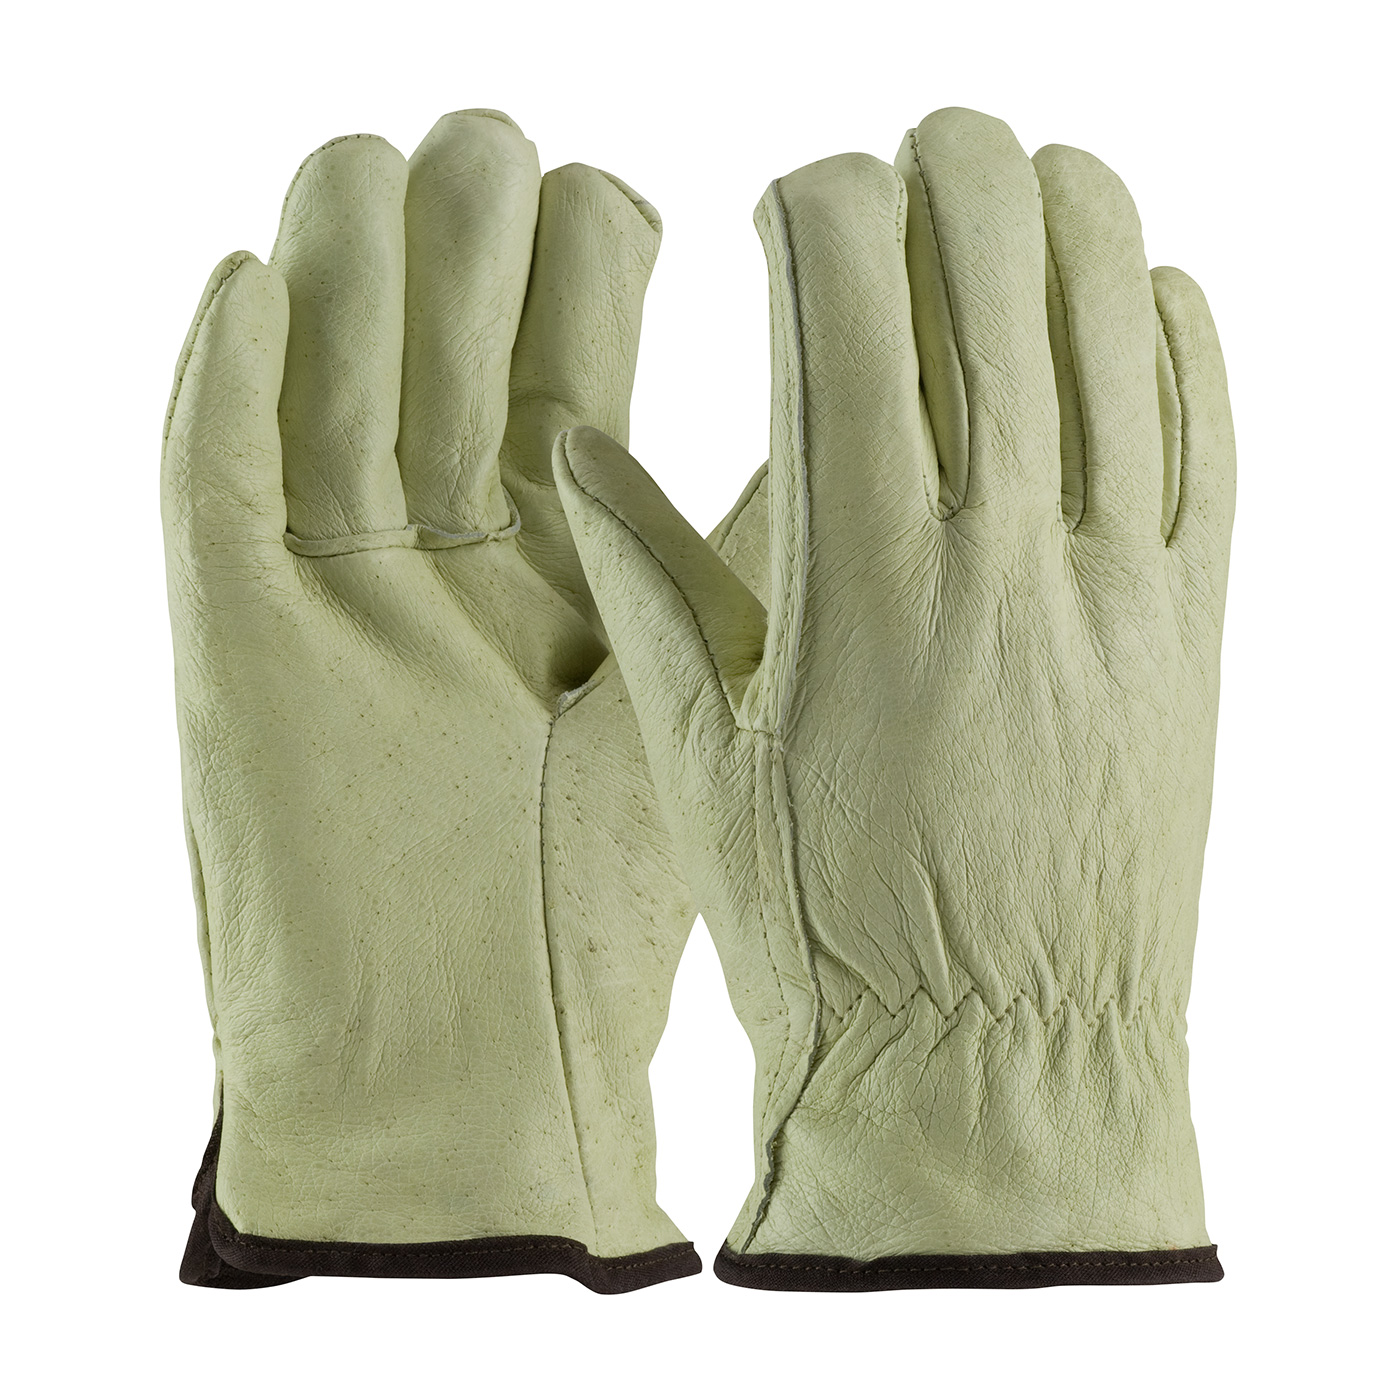 PIP Top Grain Pigskin Leather Glove with Thermal Lining from GME Supply